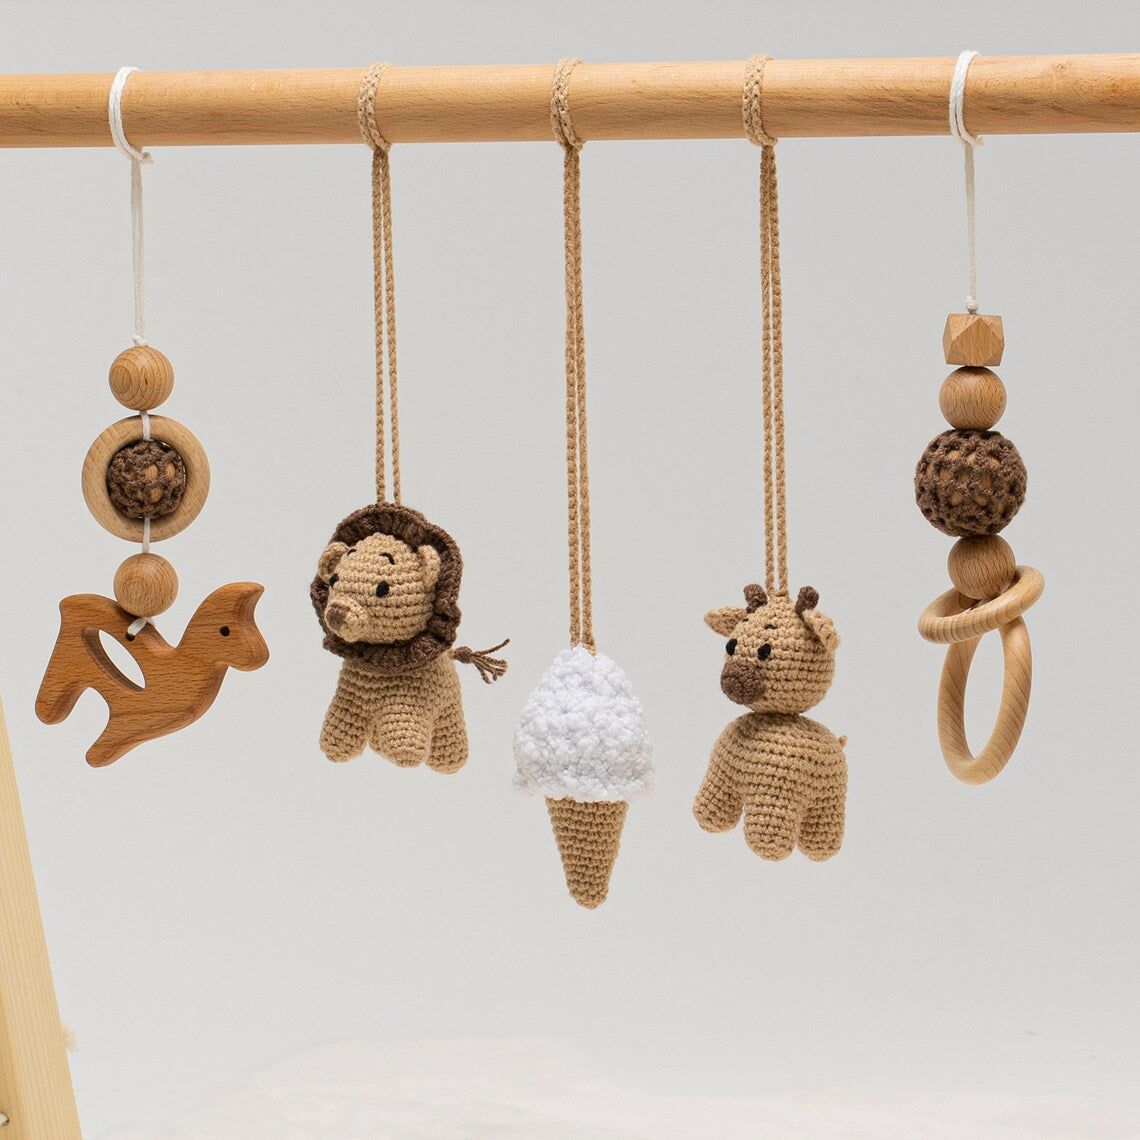 Baby Gym with Crocheted Toys, Wooden Play Gym with 5 Toys, Baby Shower Gift / HANDMADE